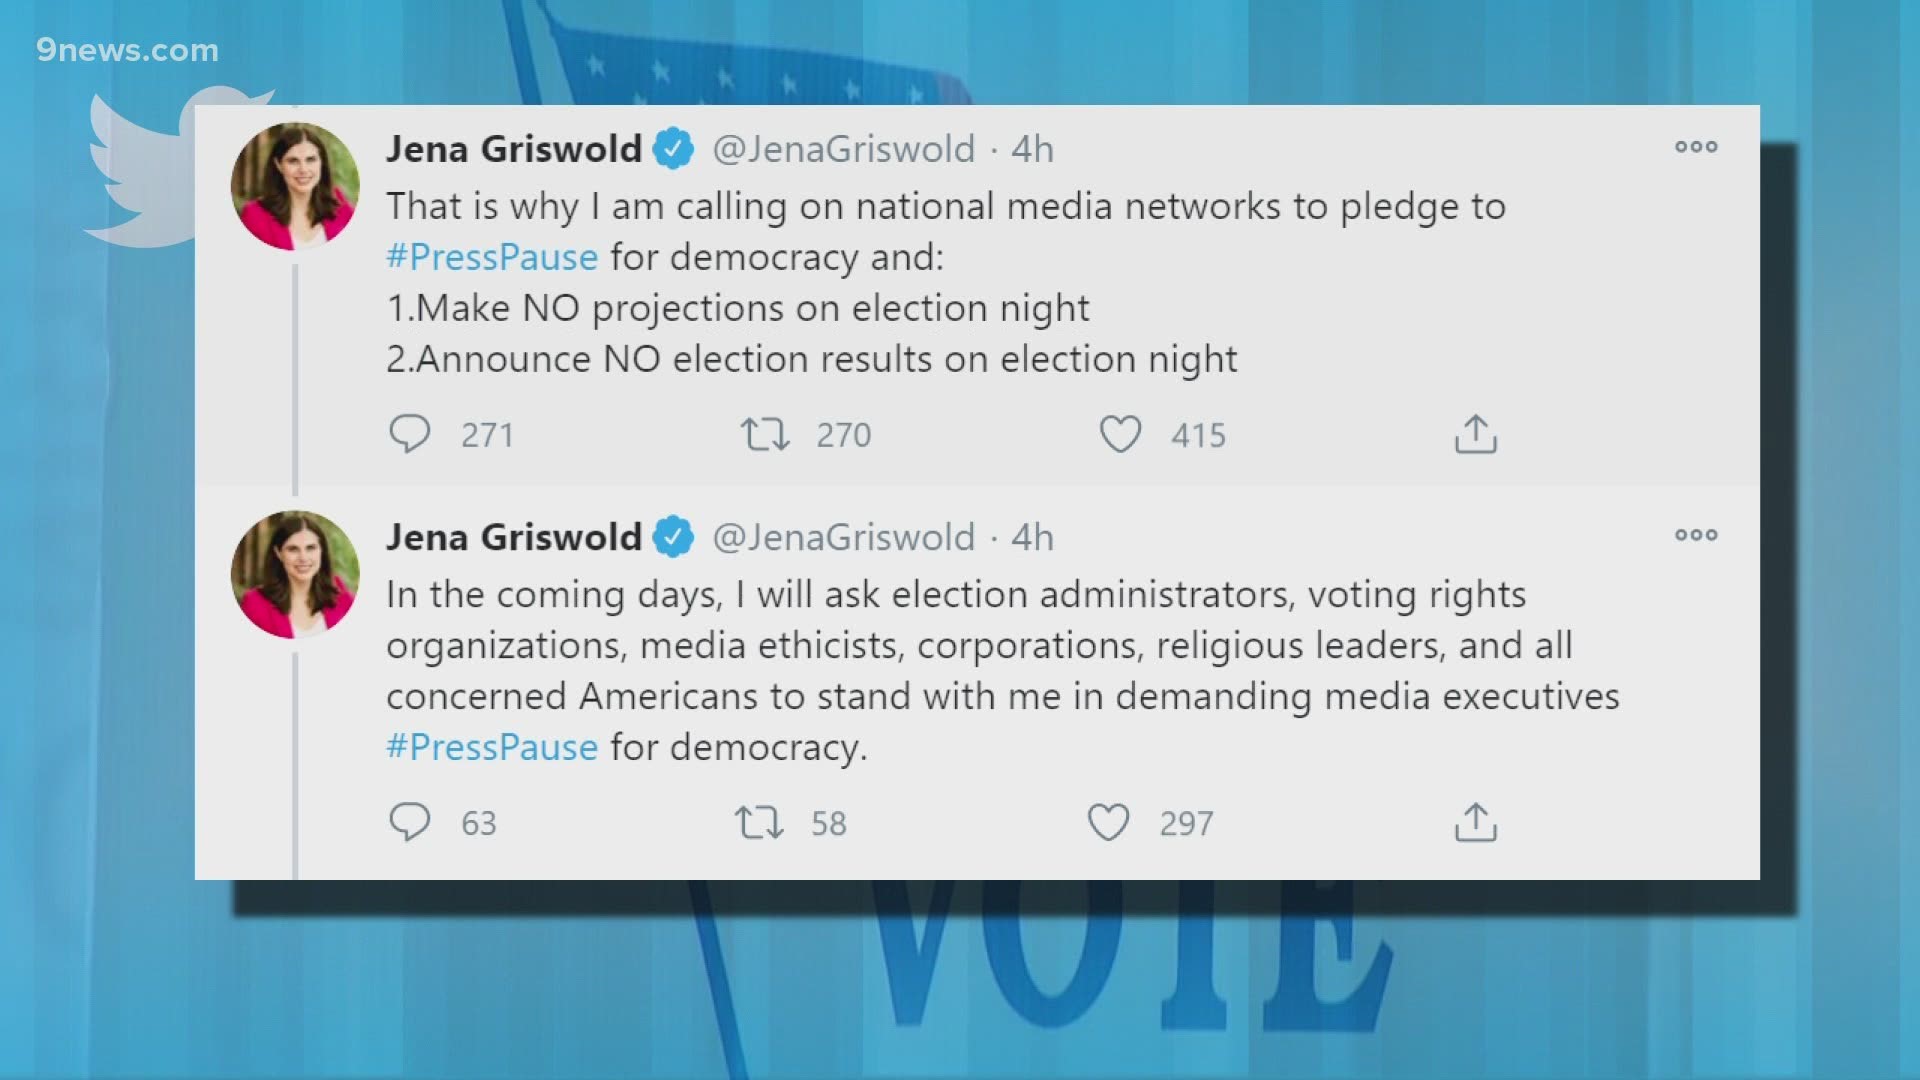 Secretary of State Jena Griswold called for journalists to withhold vote totals because Pres. Trump may declare victory prematurely, as mail-in ballots are tallied.